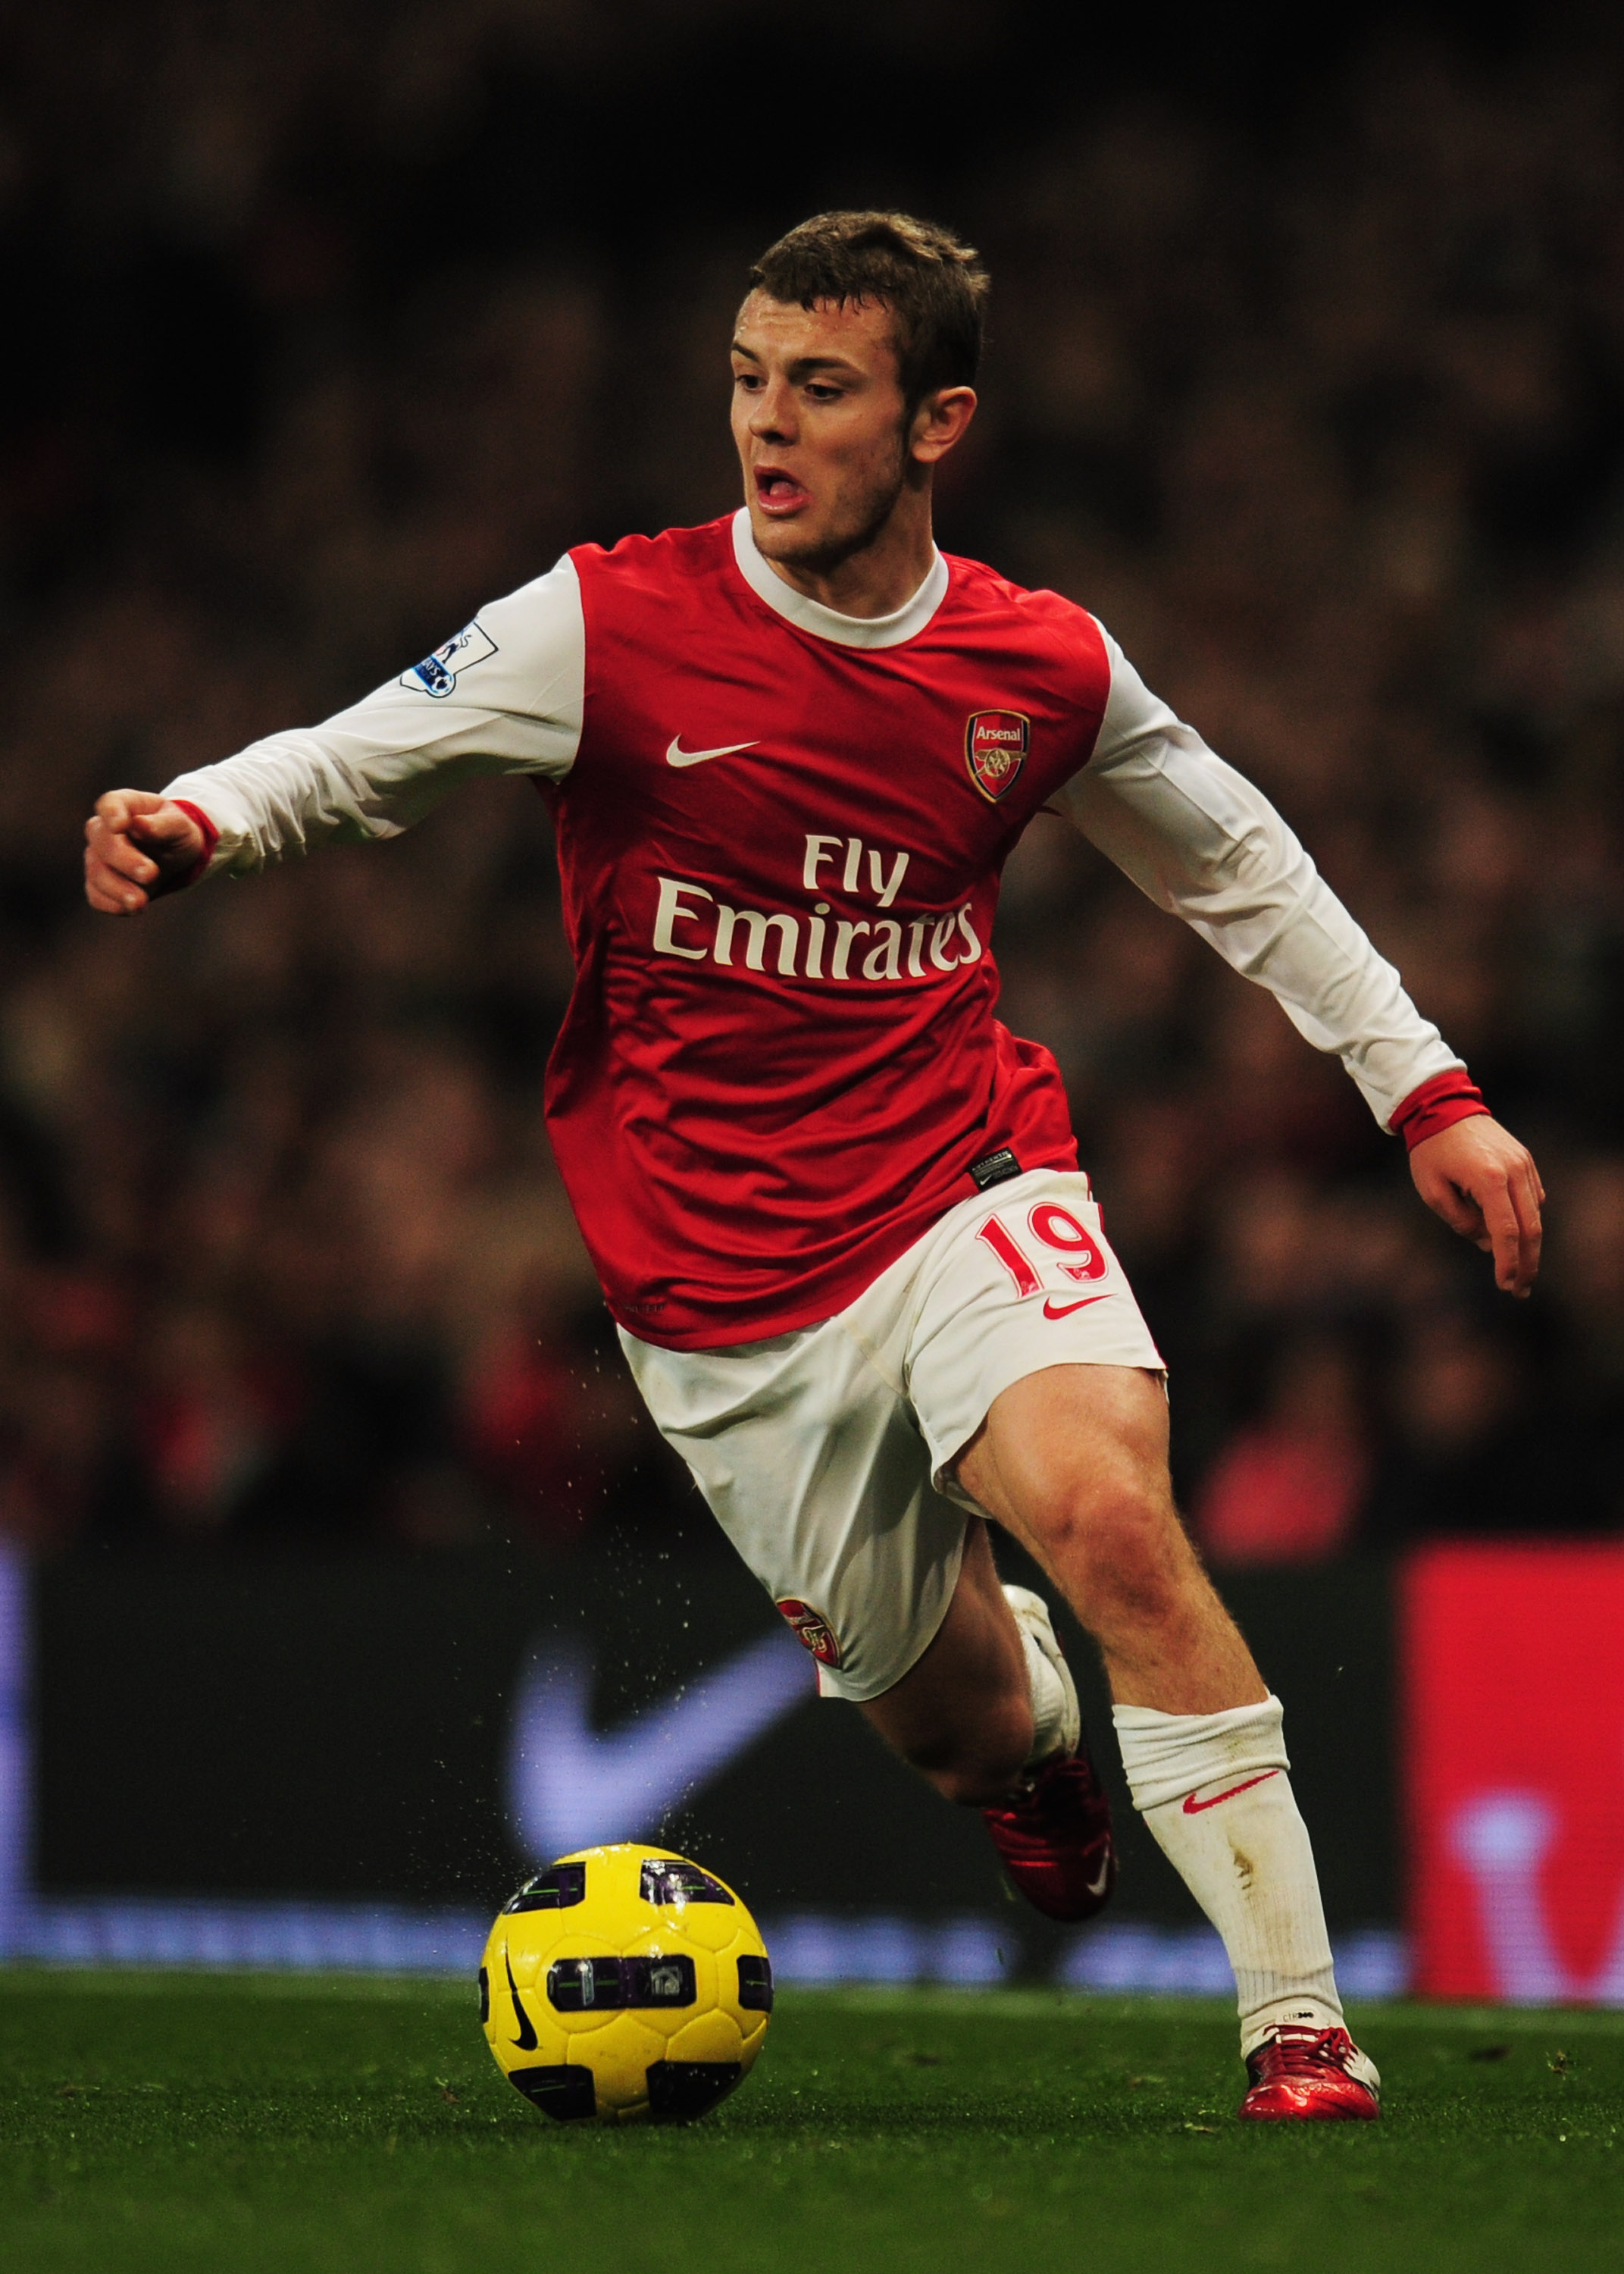 LONDON, ENGLAND - JANUARY 05:  Jack Wilshere of Arsenal in action during the Barclays Premier League match between Arsenal and Manchester City at the Emirates Stadium on January 5, 2011 in London, England.  (Photo by Shaun Botterill/Getty Images)